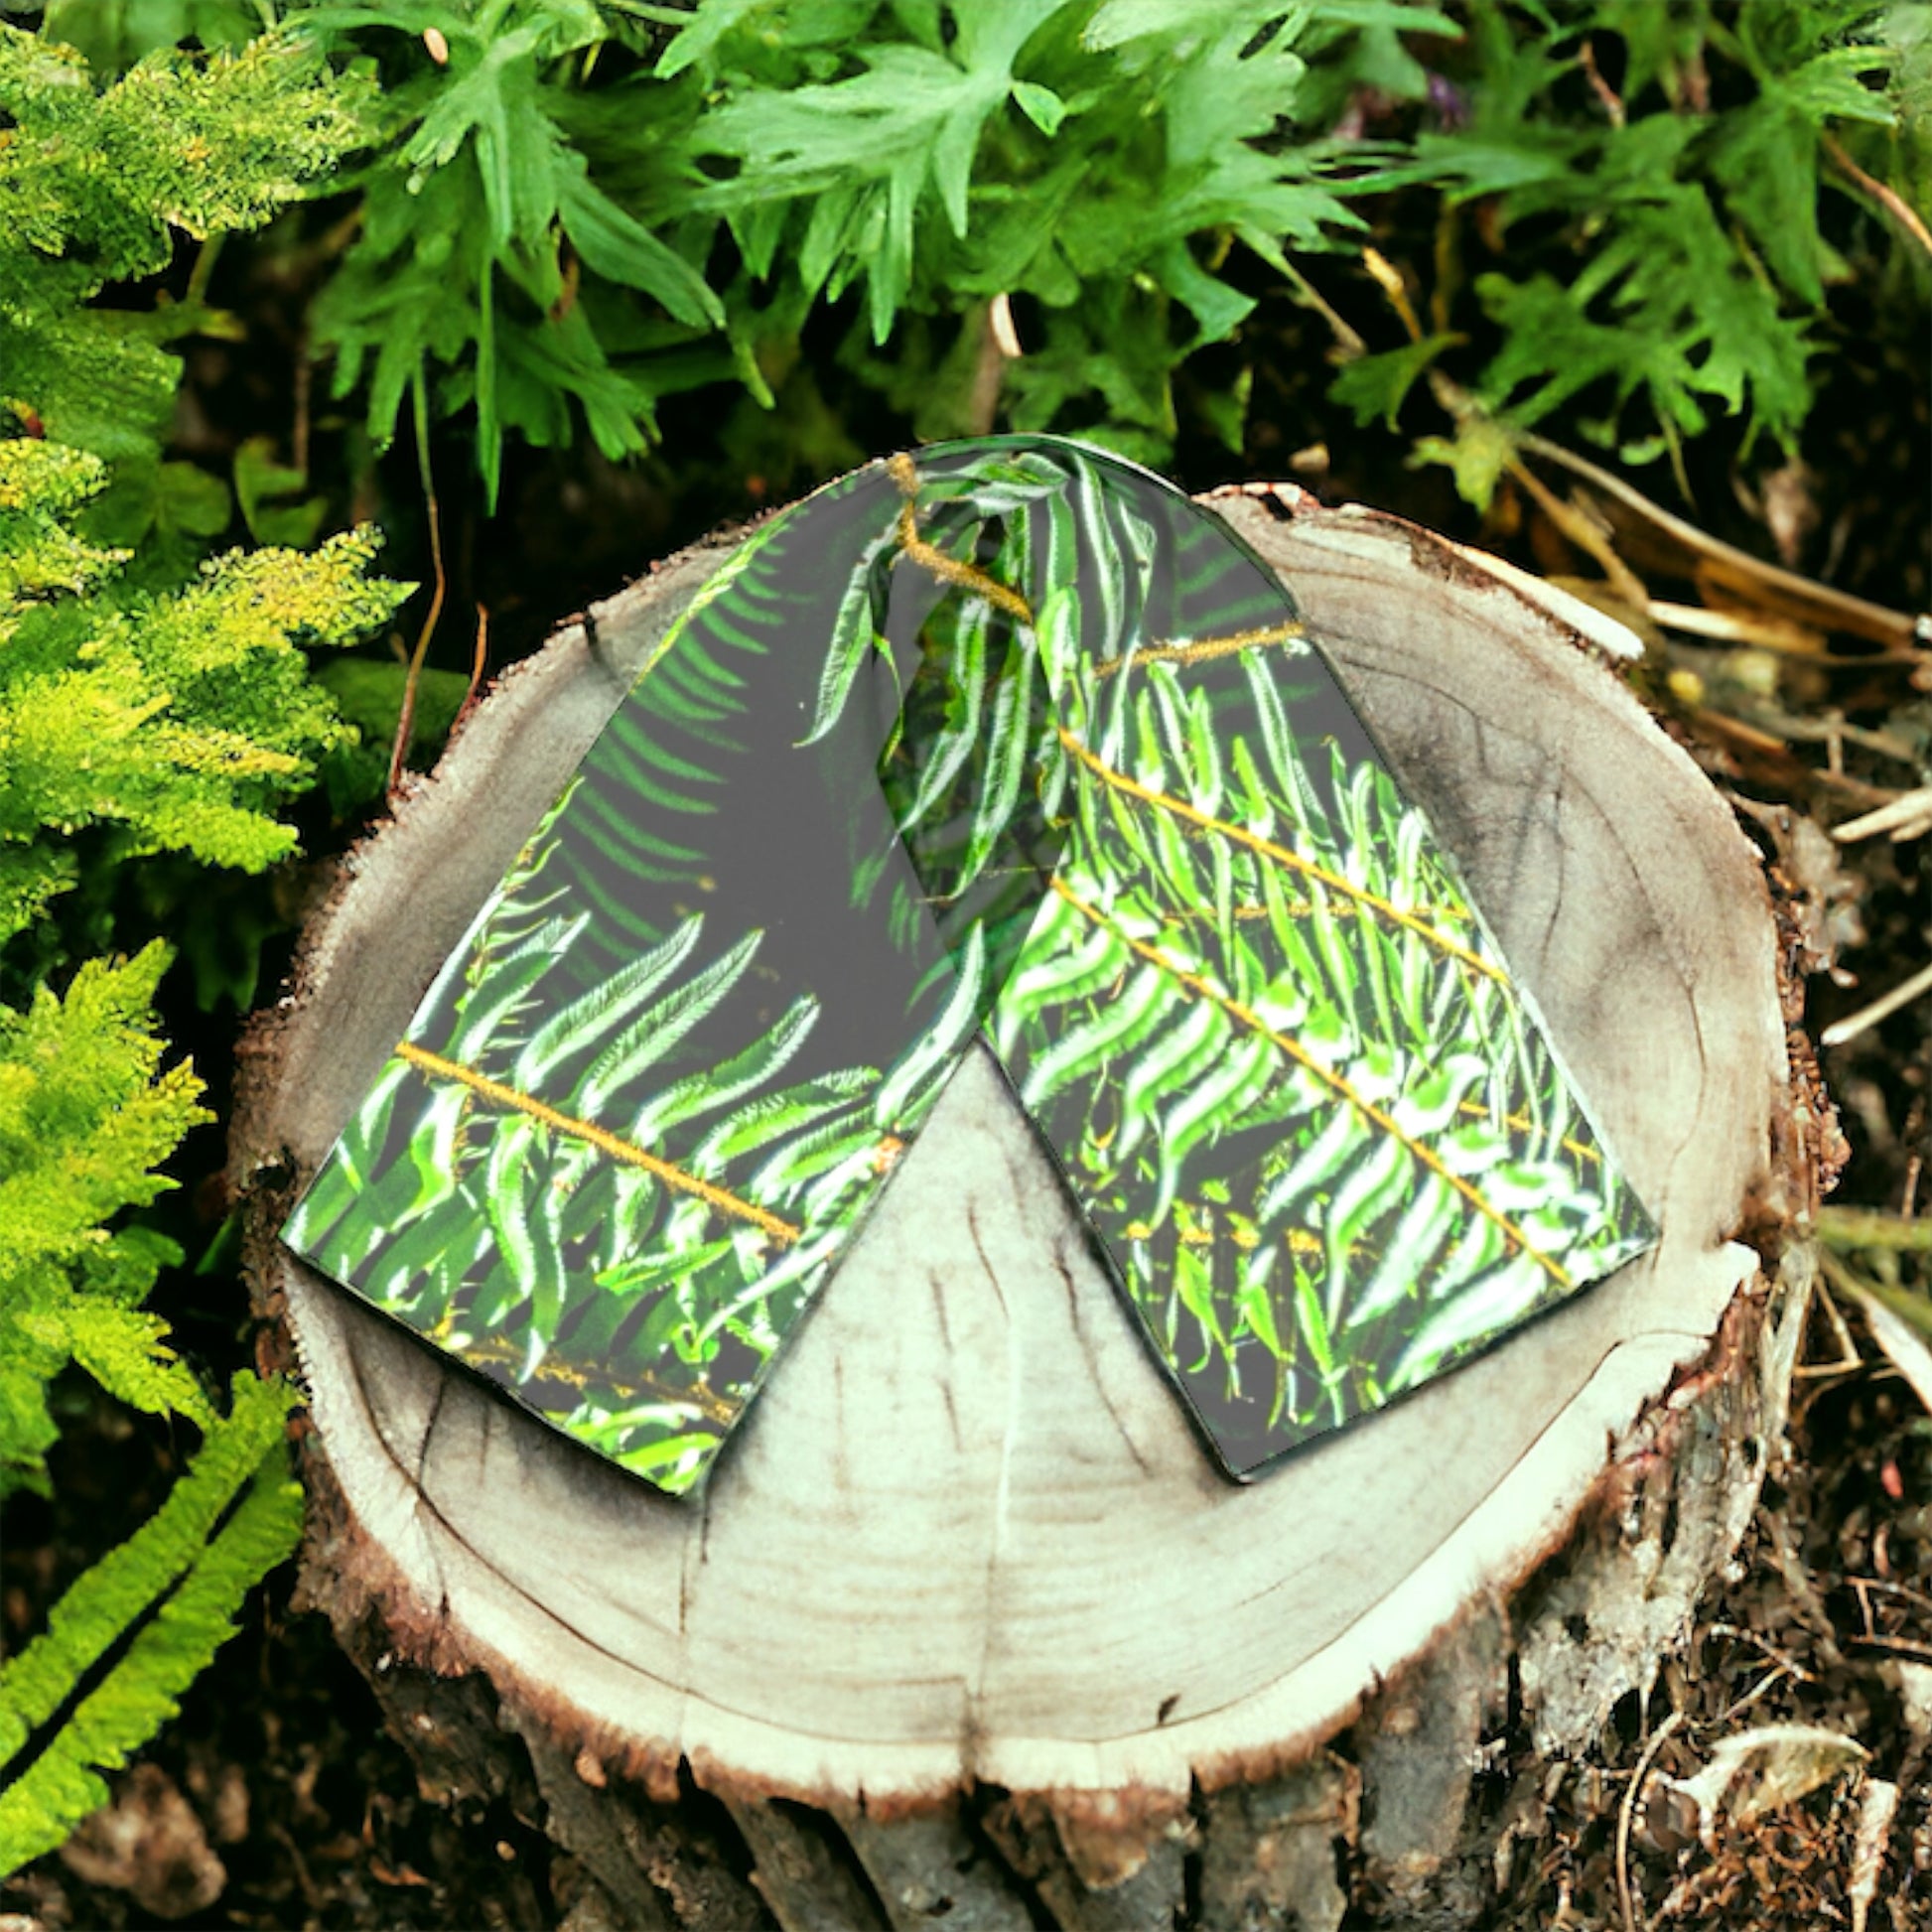 Rainforest long scarf is shown on a wood tree stump.